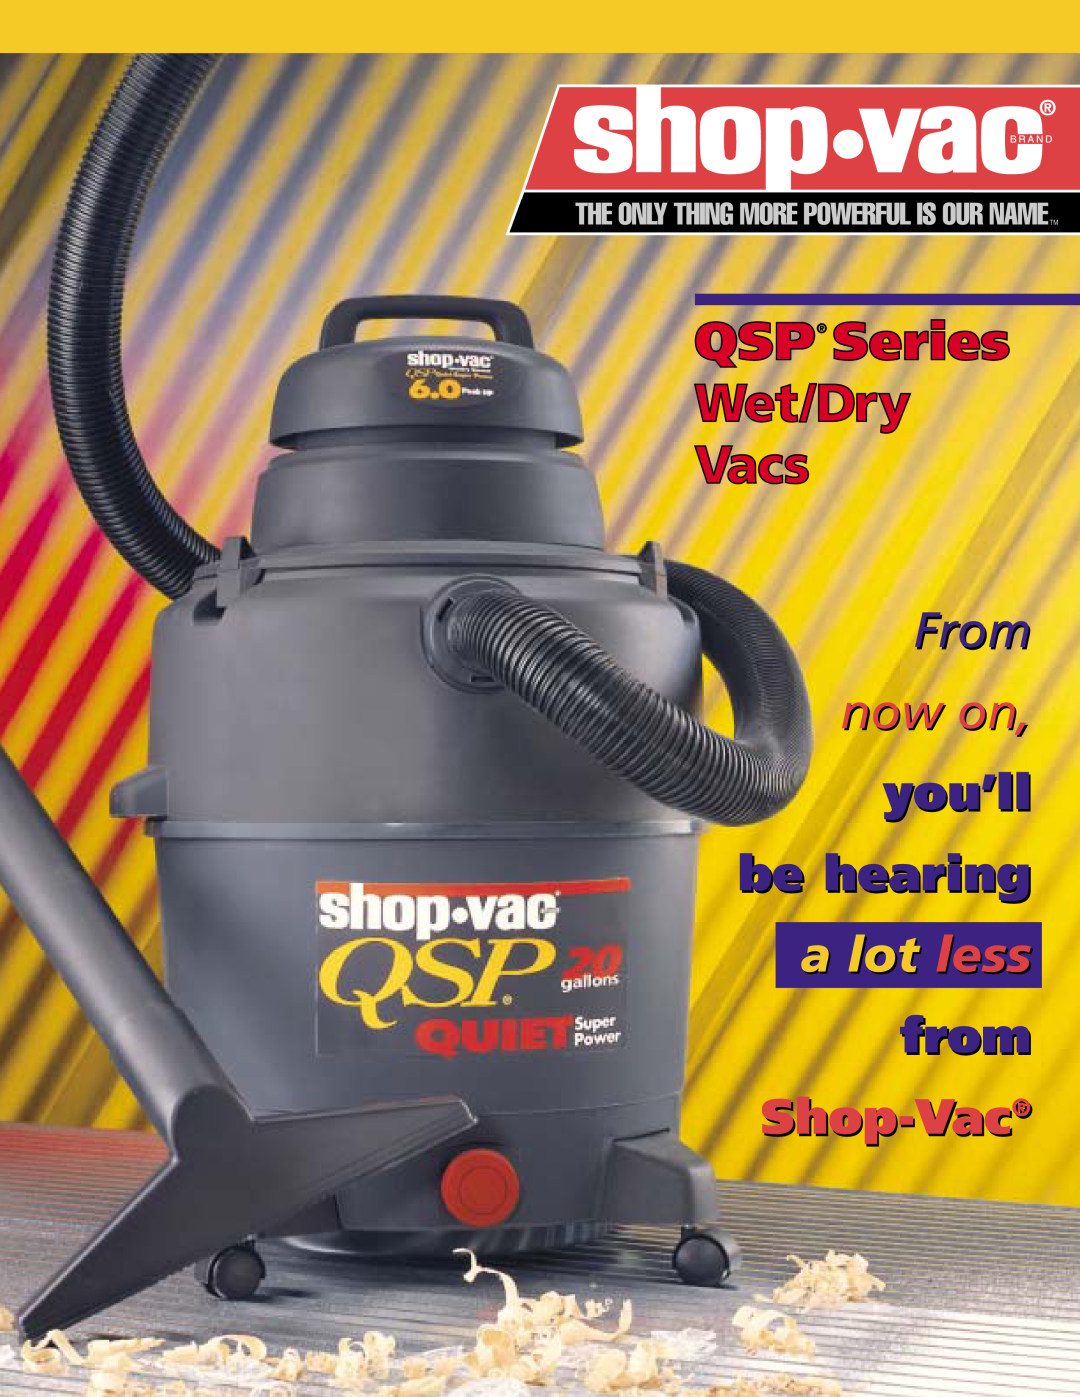 Shop-Vac manual QSP Series Wet/Dry Vacs, From, now on, you’ll be hearing, a lot less, from, Shop-Vac 